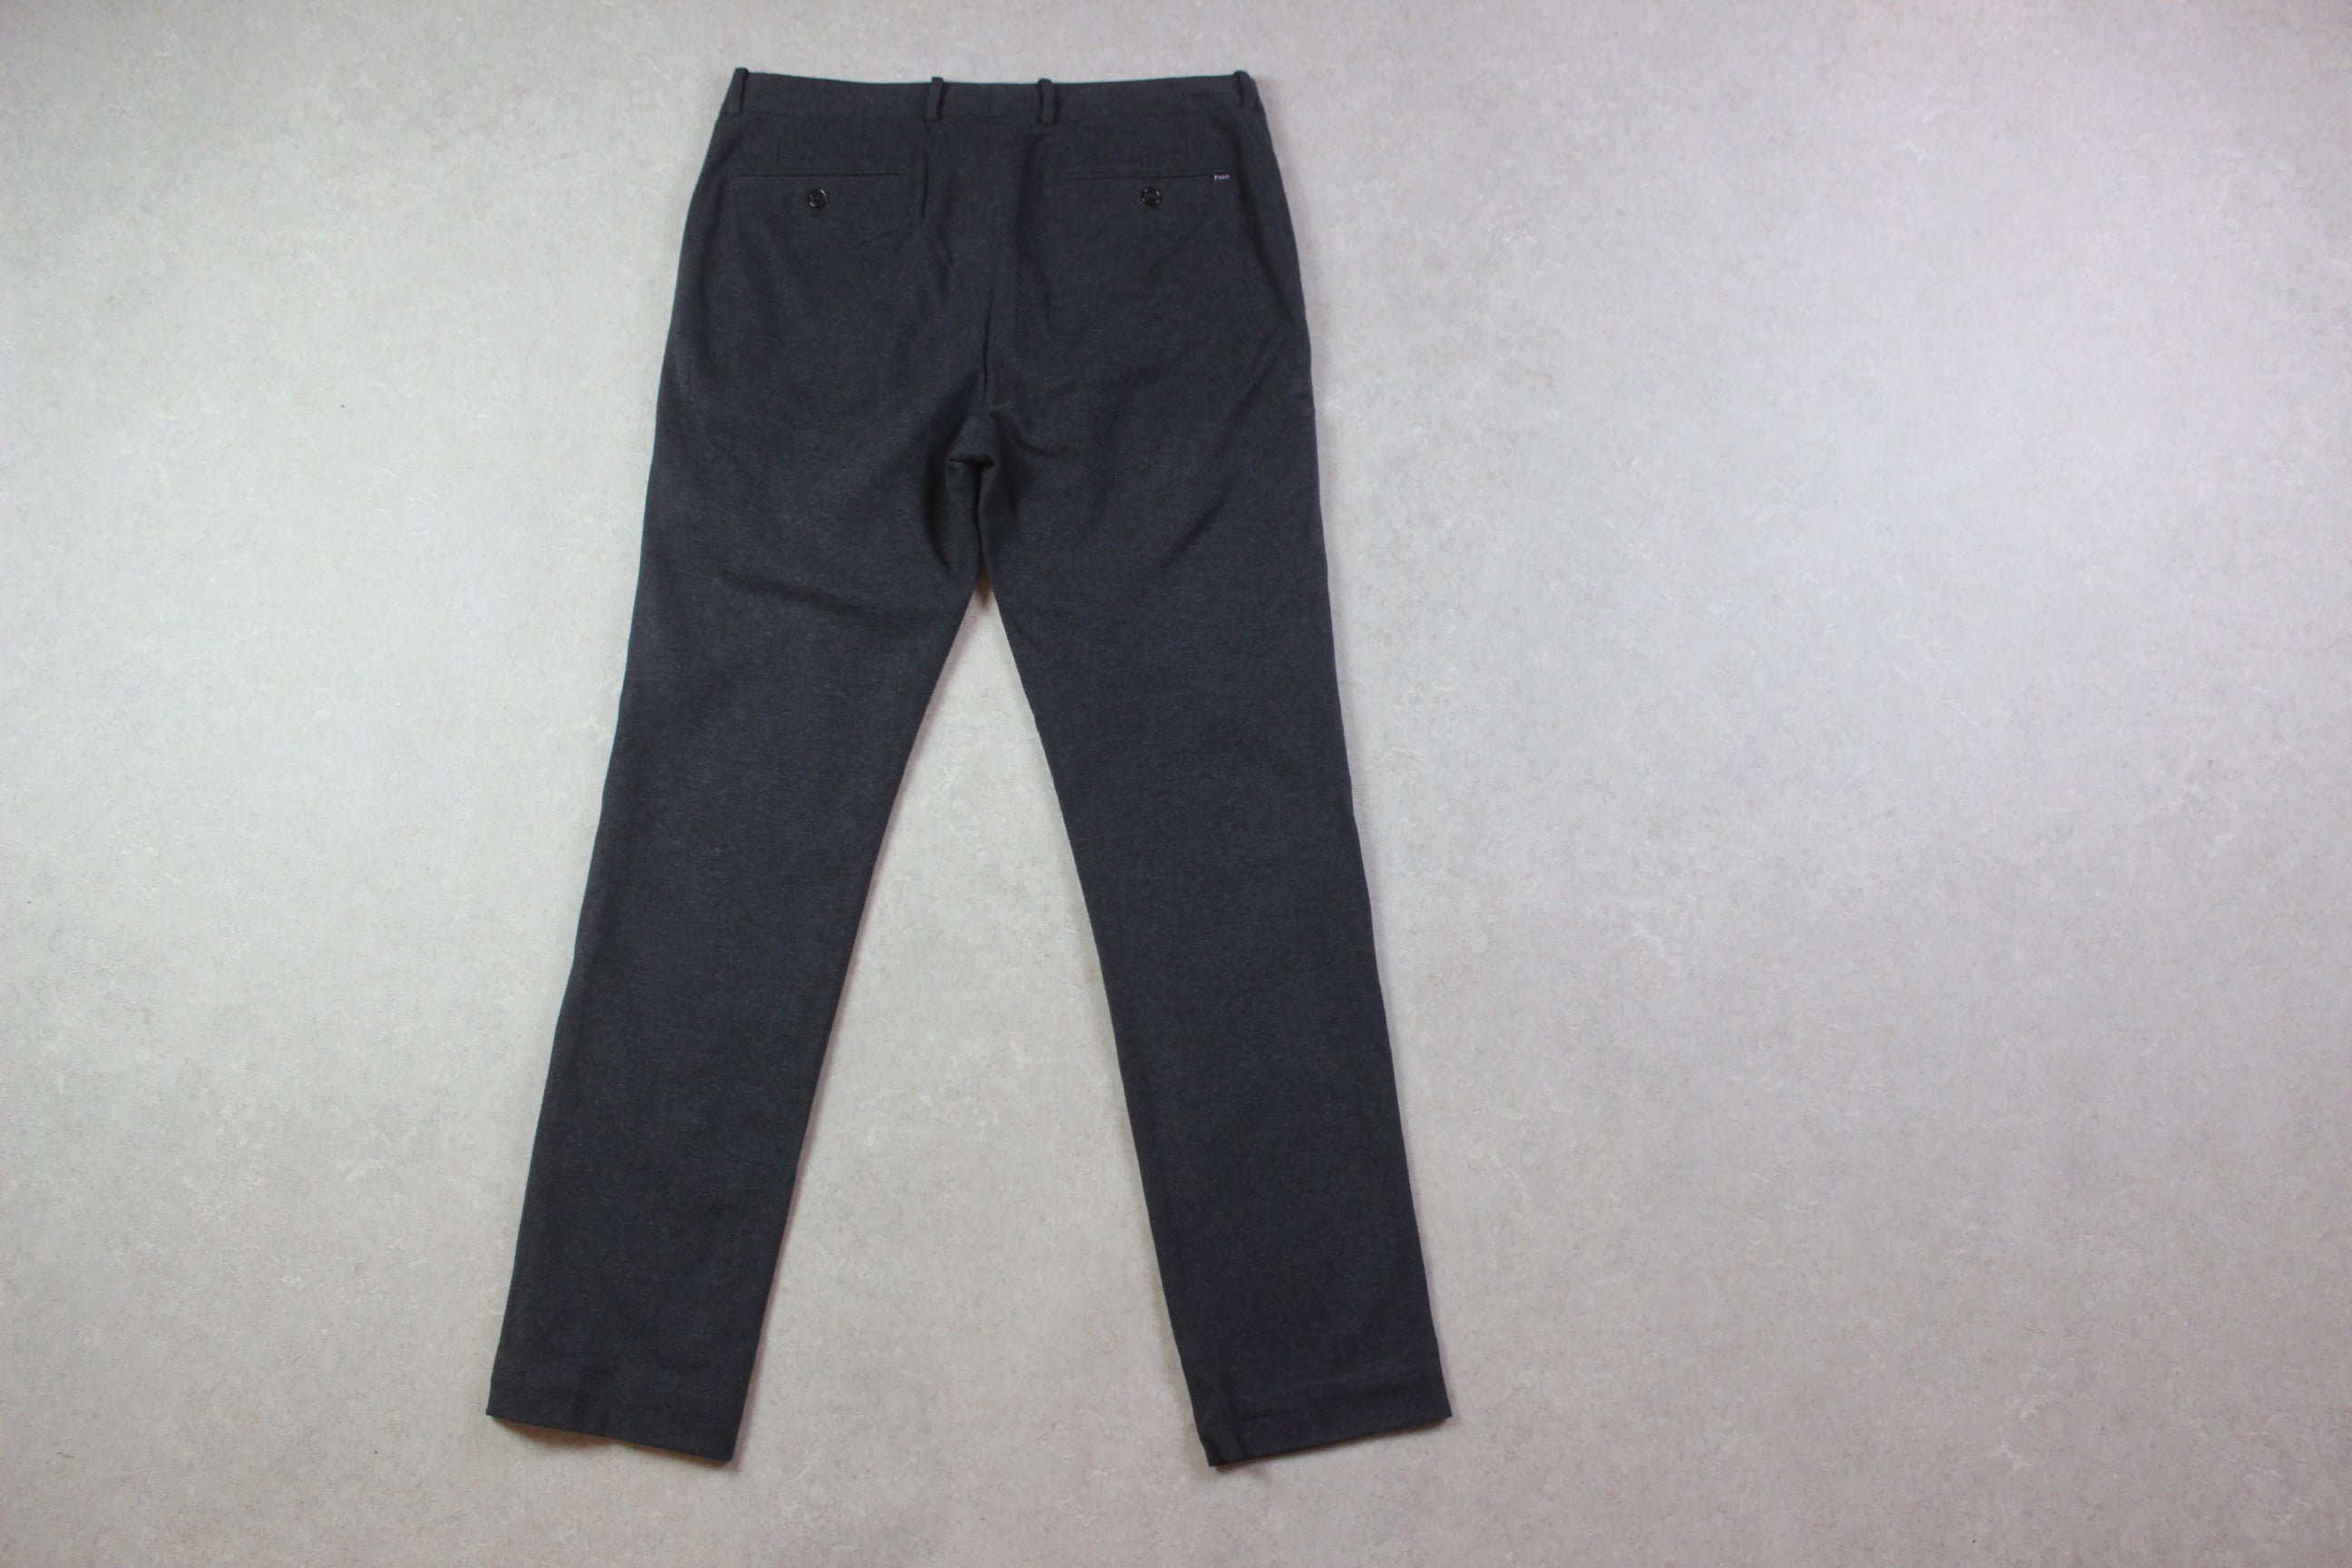 Polo Ralph Lauren - Jersey Trousers - Grey - Small/32